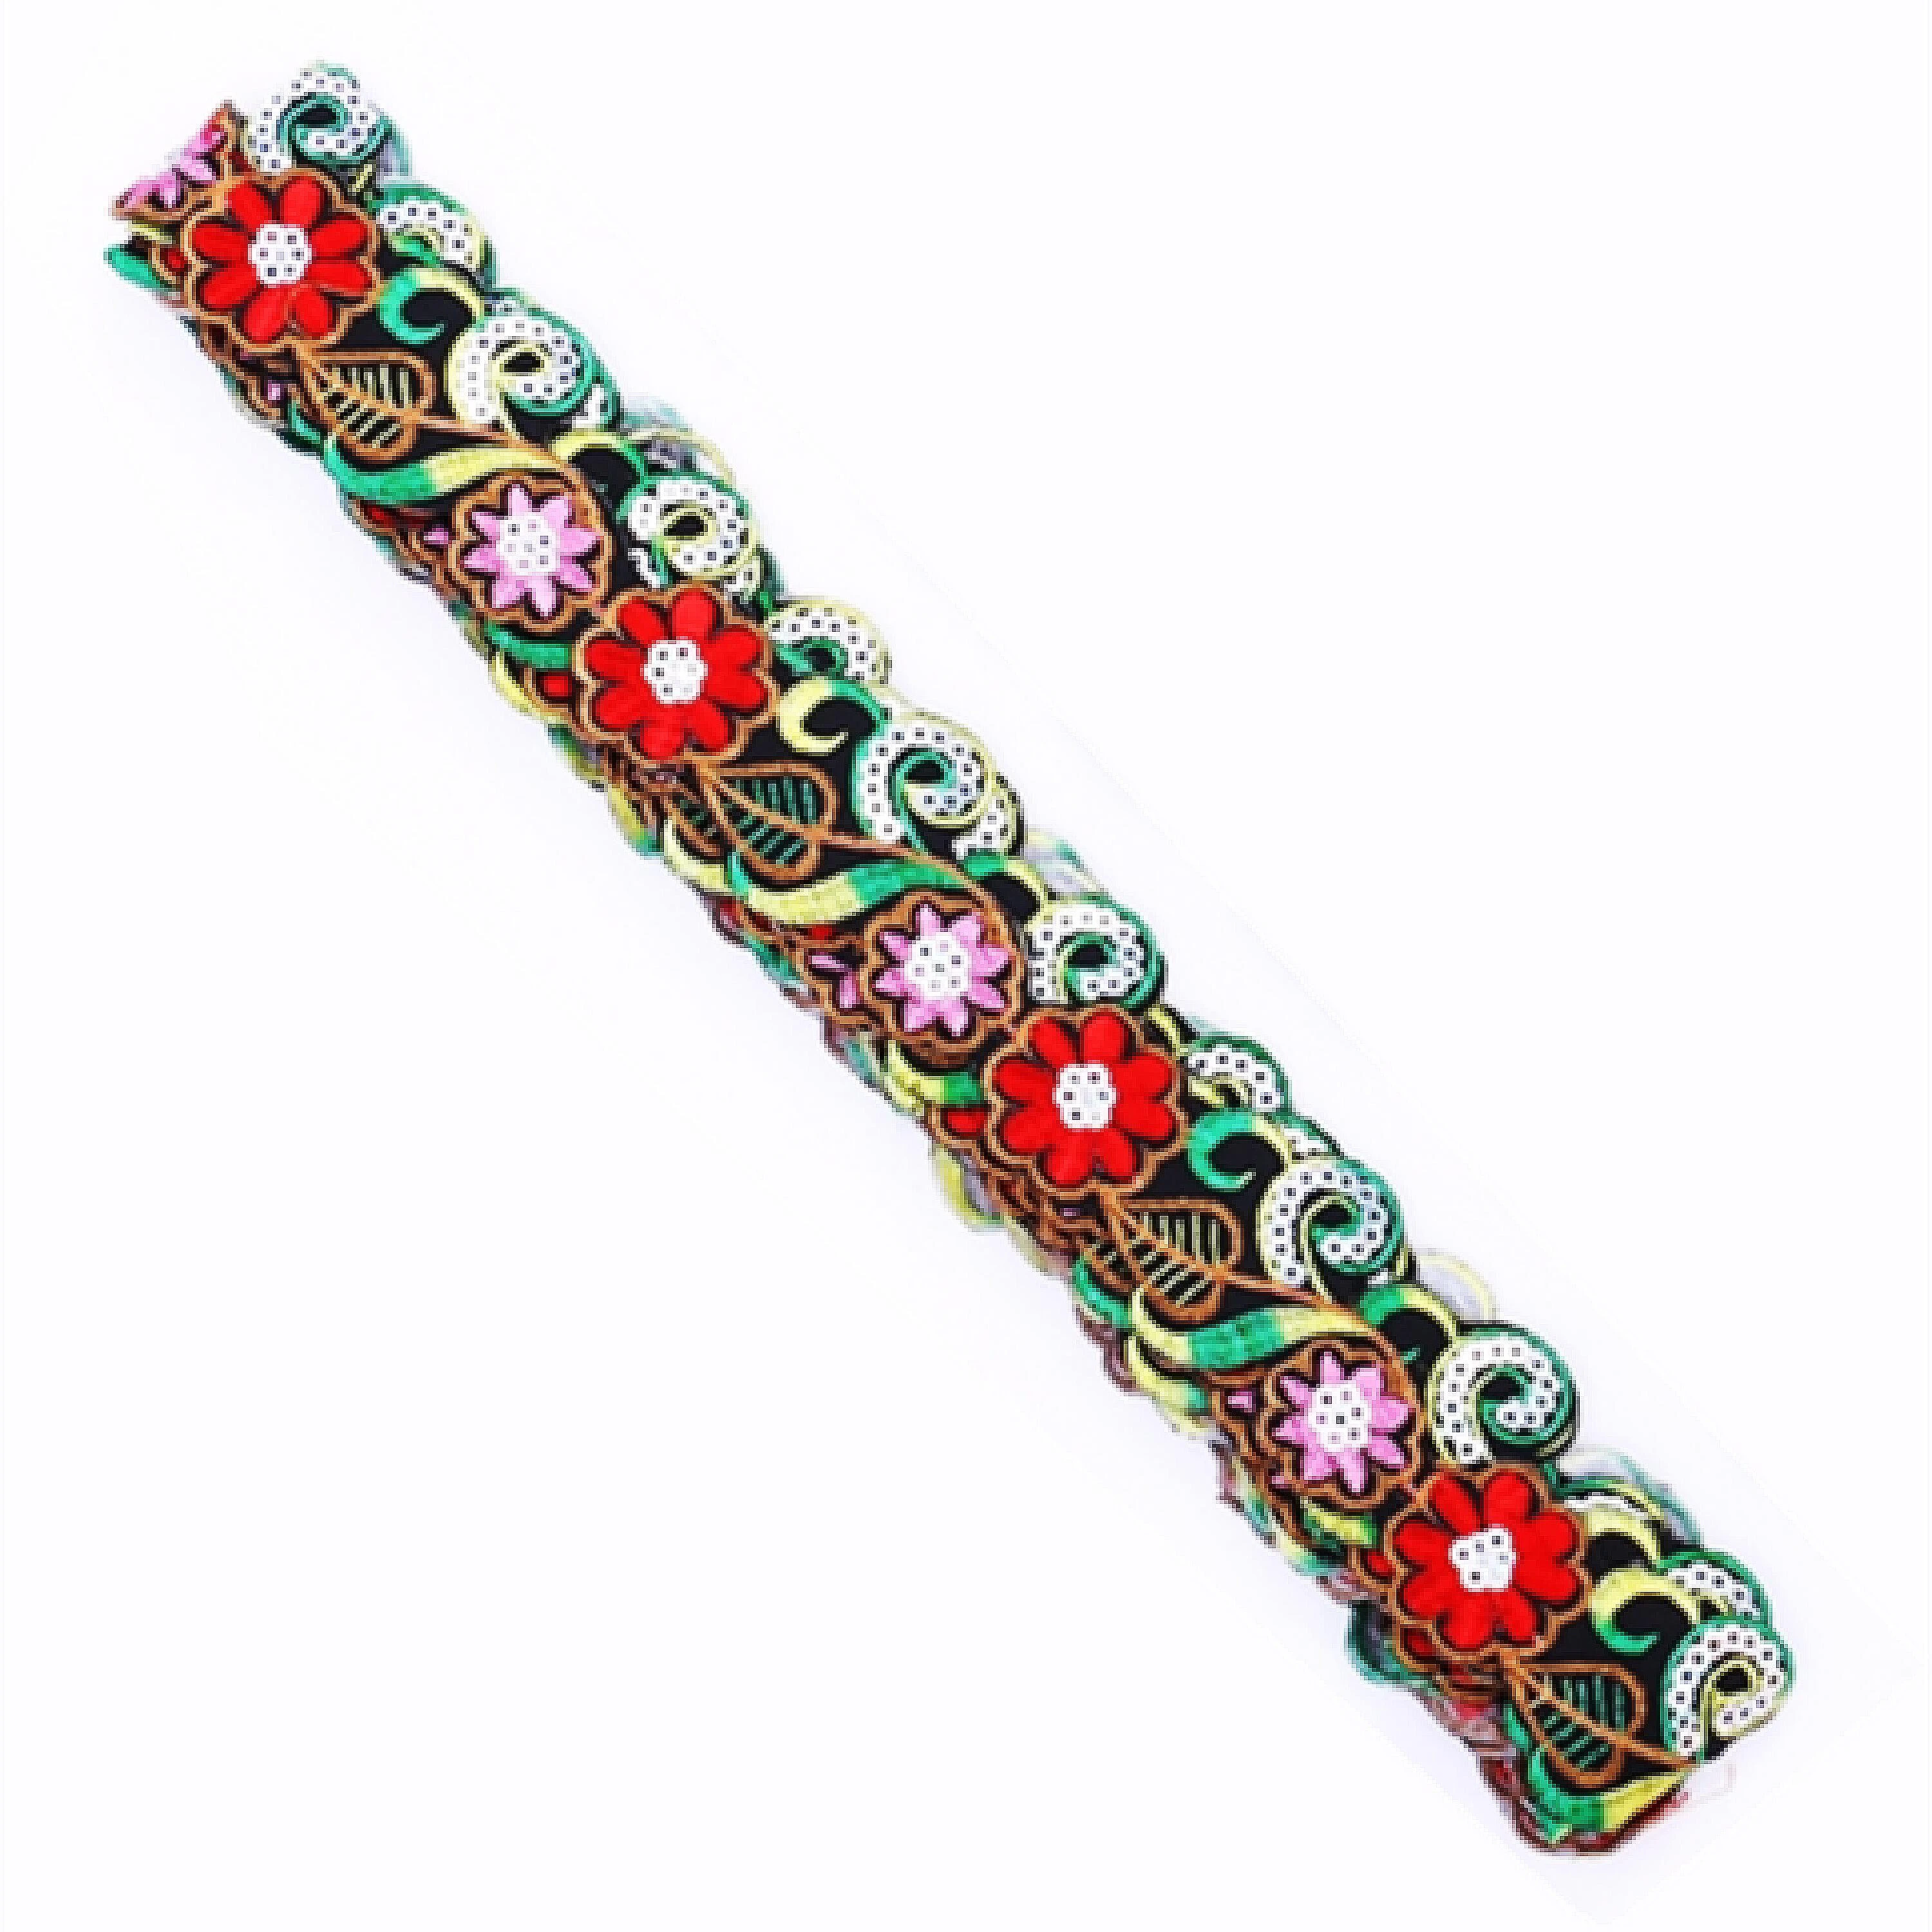 Iron on sequins flower 4 colors in stock embroidery border decorative lace trim